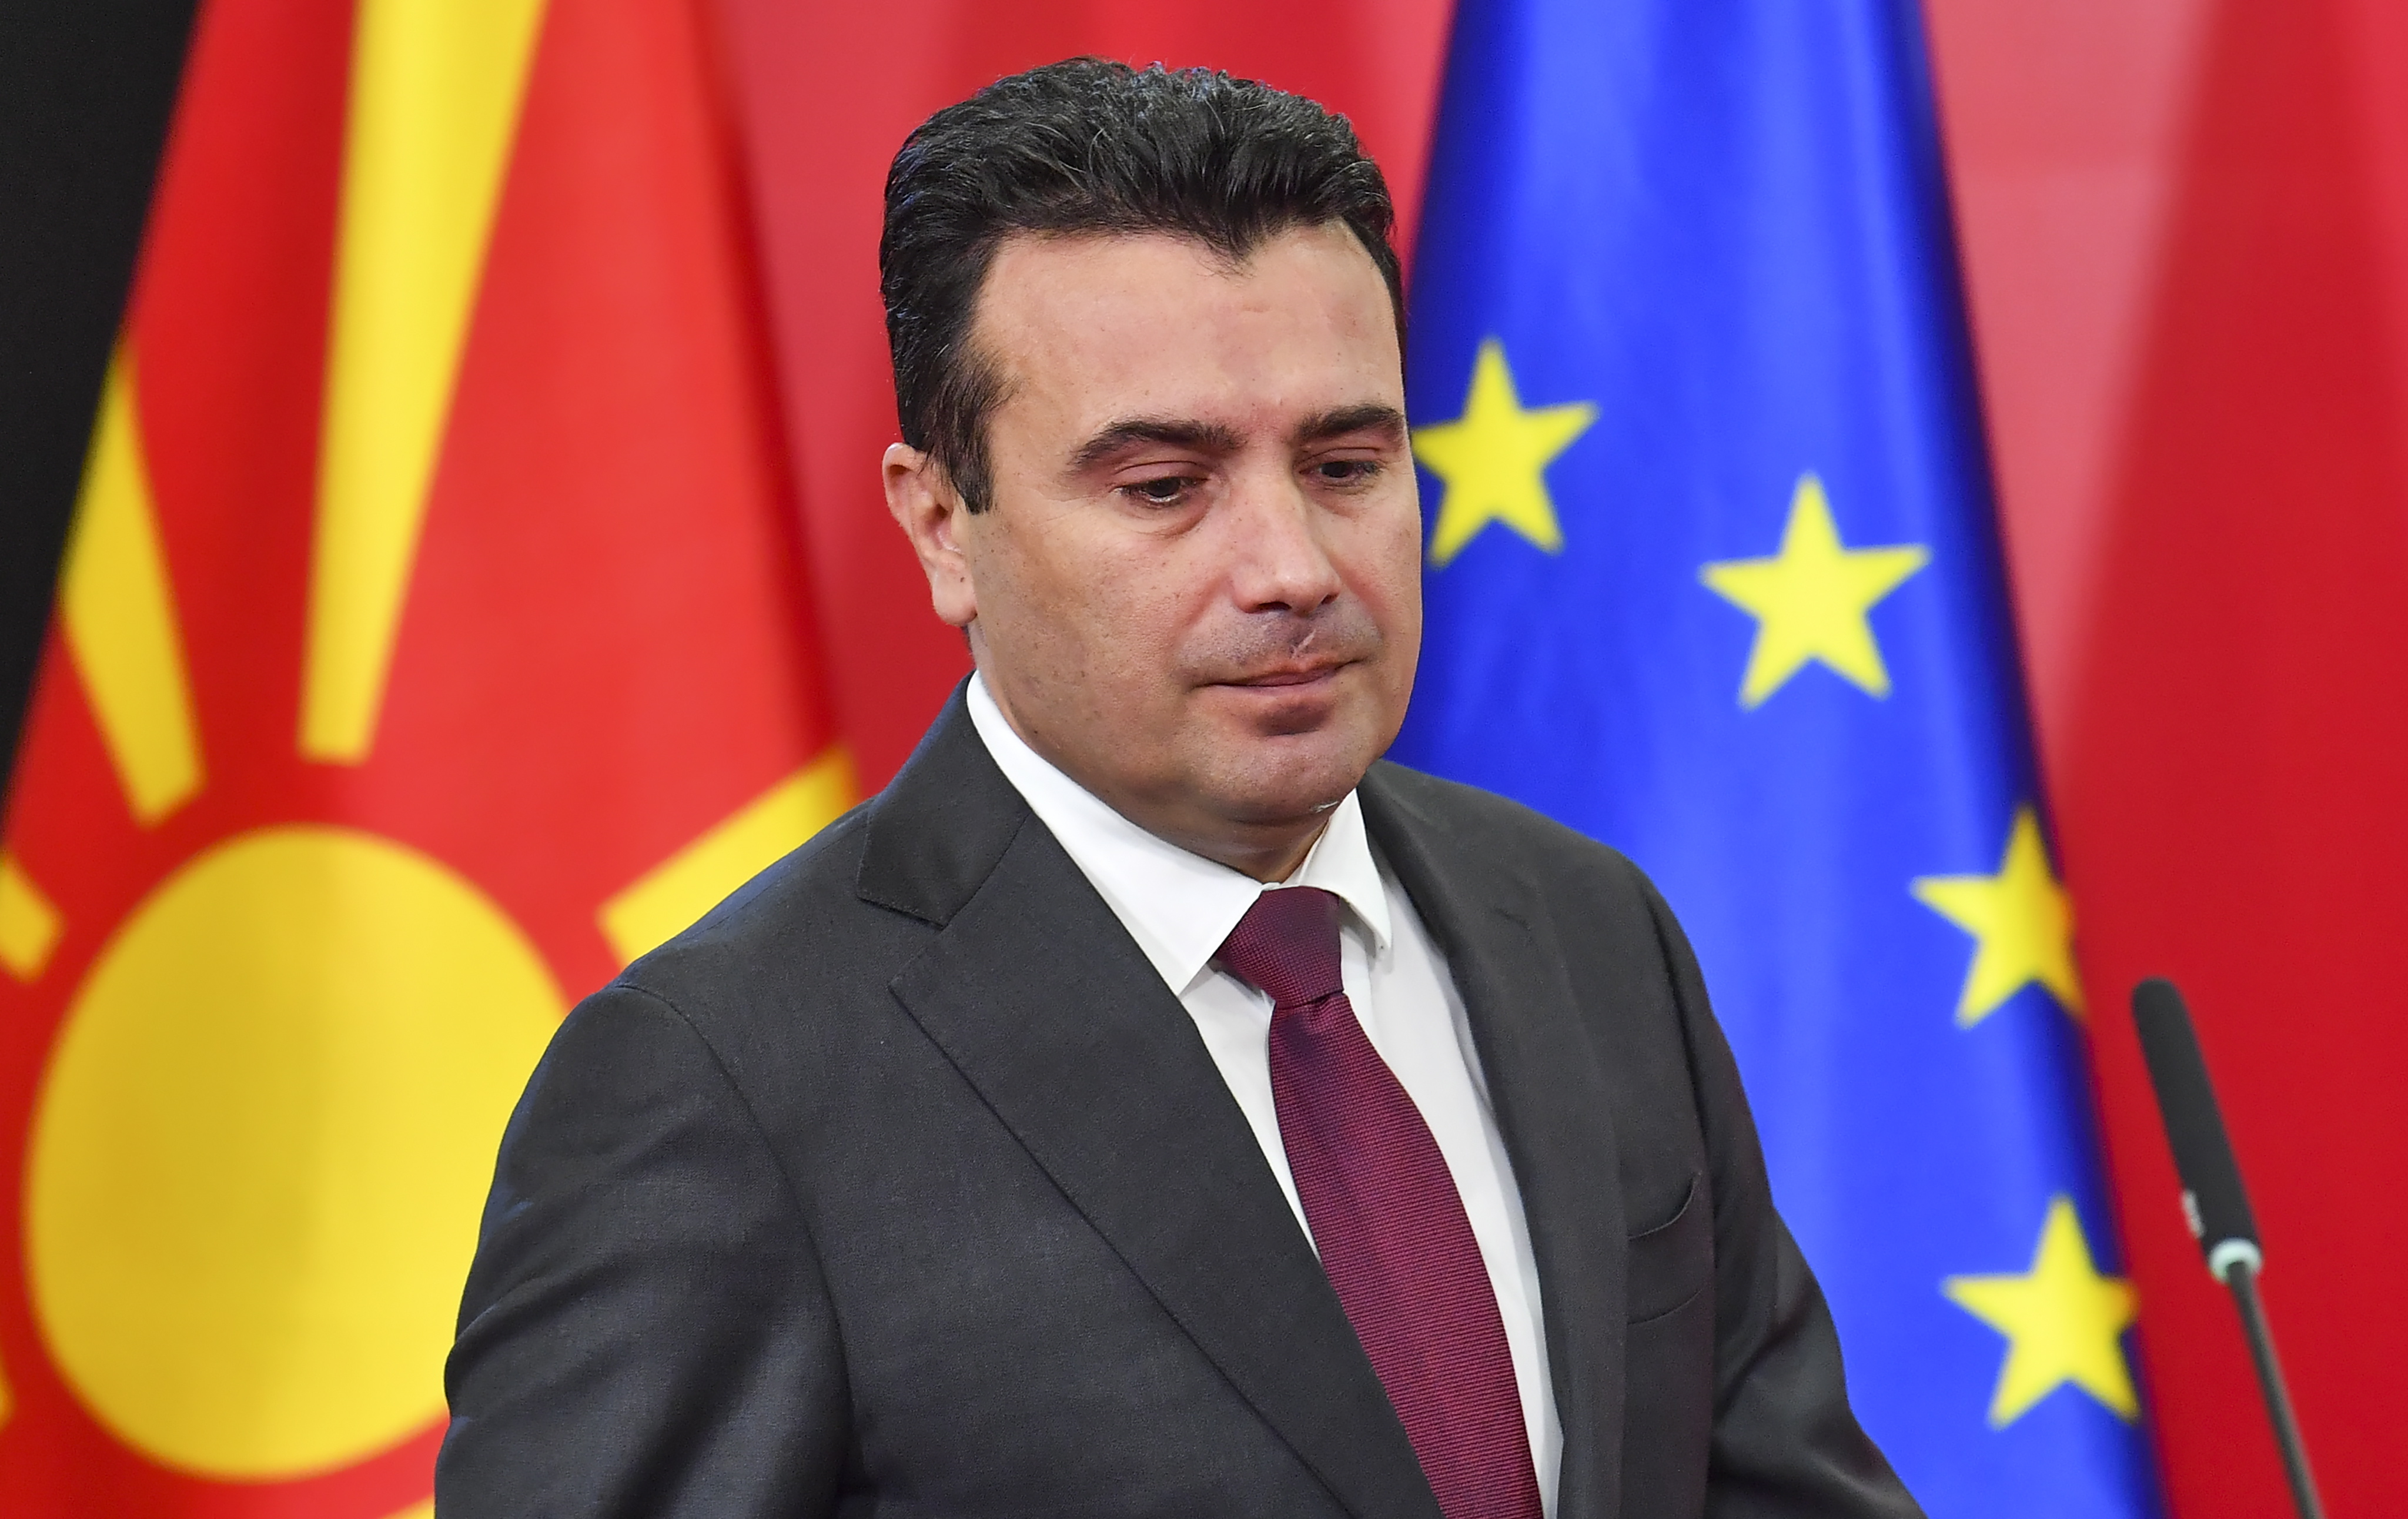 epa07933170 Macedonian Prime Minister Zoran Zaev addresses a press conference to announce early Parliamentary election, in Skopje, Republic of North Macedonia, 19 October 2018. Zaev called for early parliamentary elections a day after EU leaders delayed the decision for accession talks with North Macedonia and Albania for the third time as they gathered in Brussels for a two-day summit dominated by Brexit talks.  EPA/GEORGI LICOVSKI